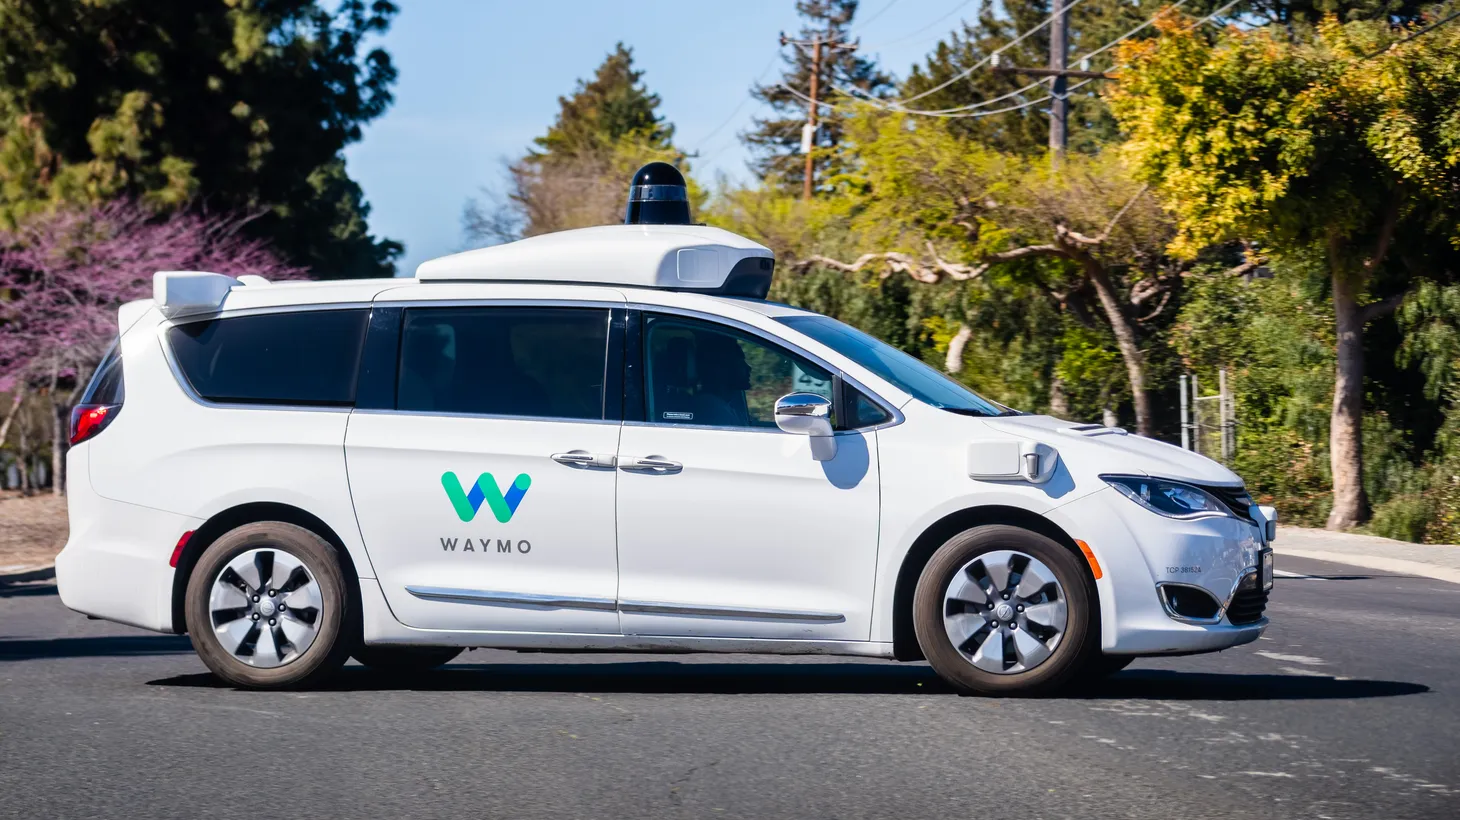 A Waymo self-driving car travels down the street in San Francisco.